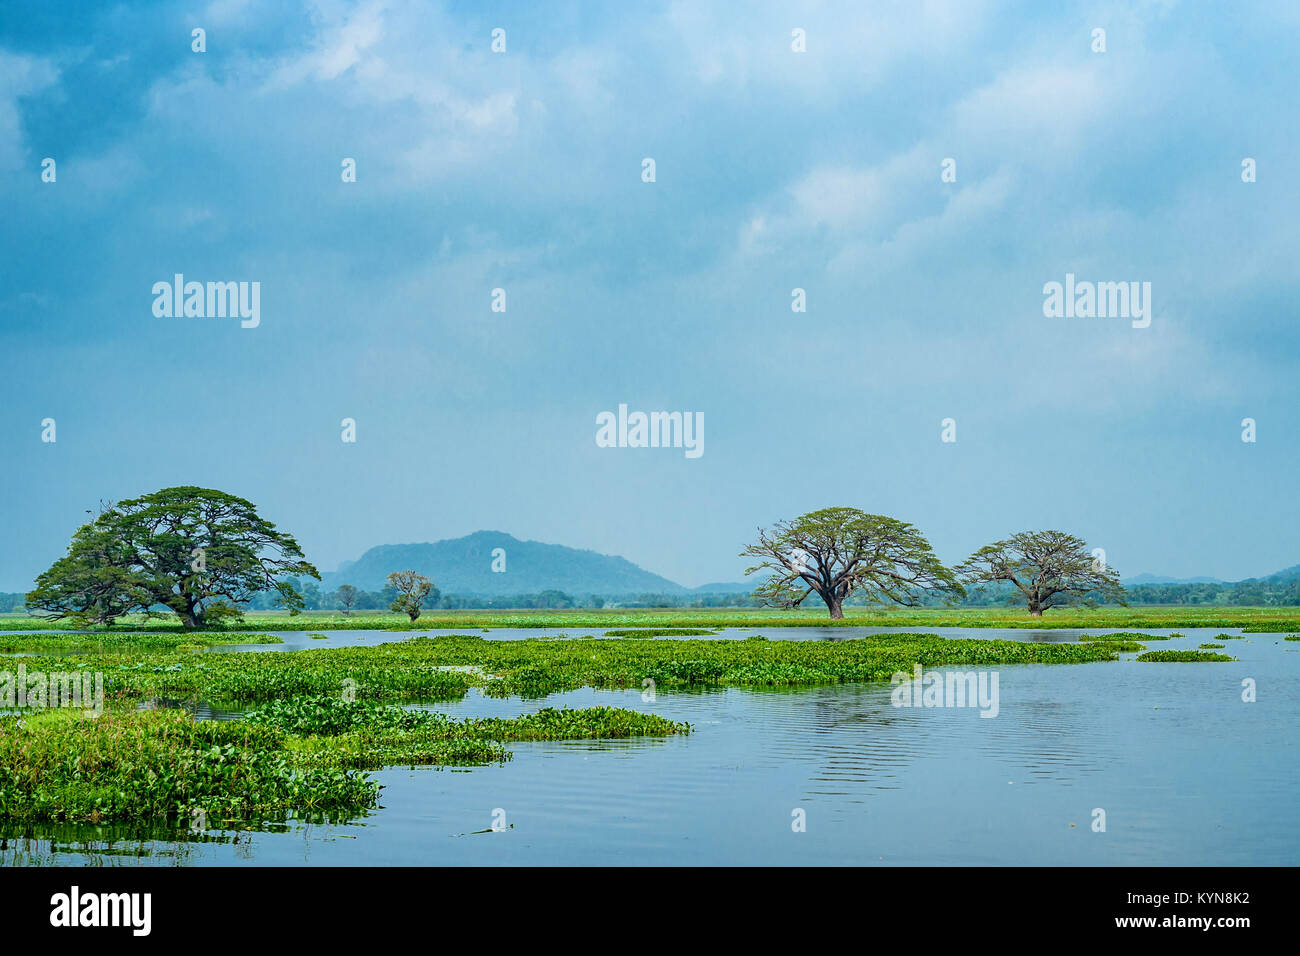 Scenic view of tropical lake with trees in water Stock Photo